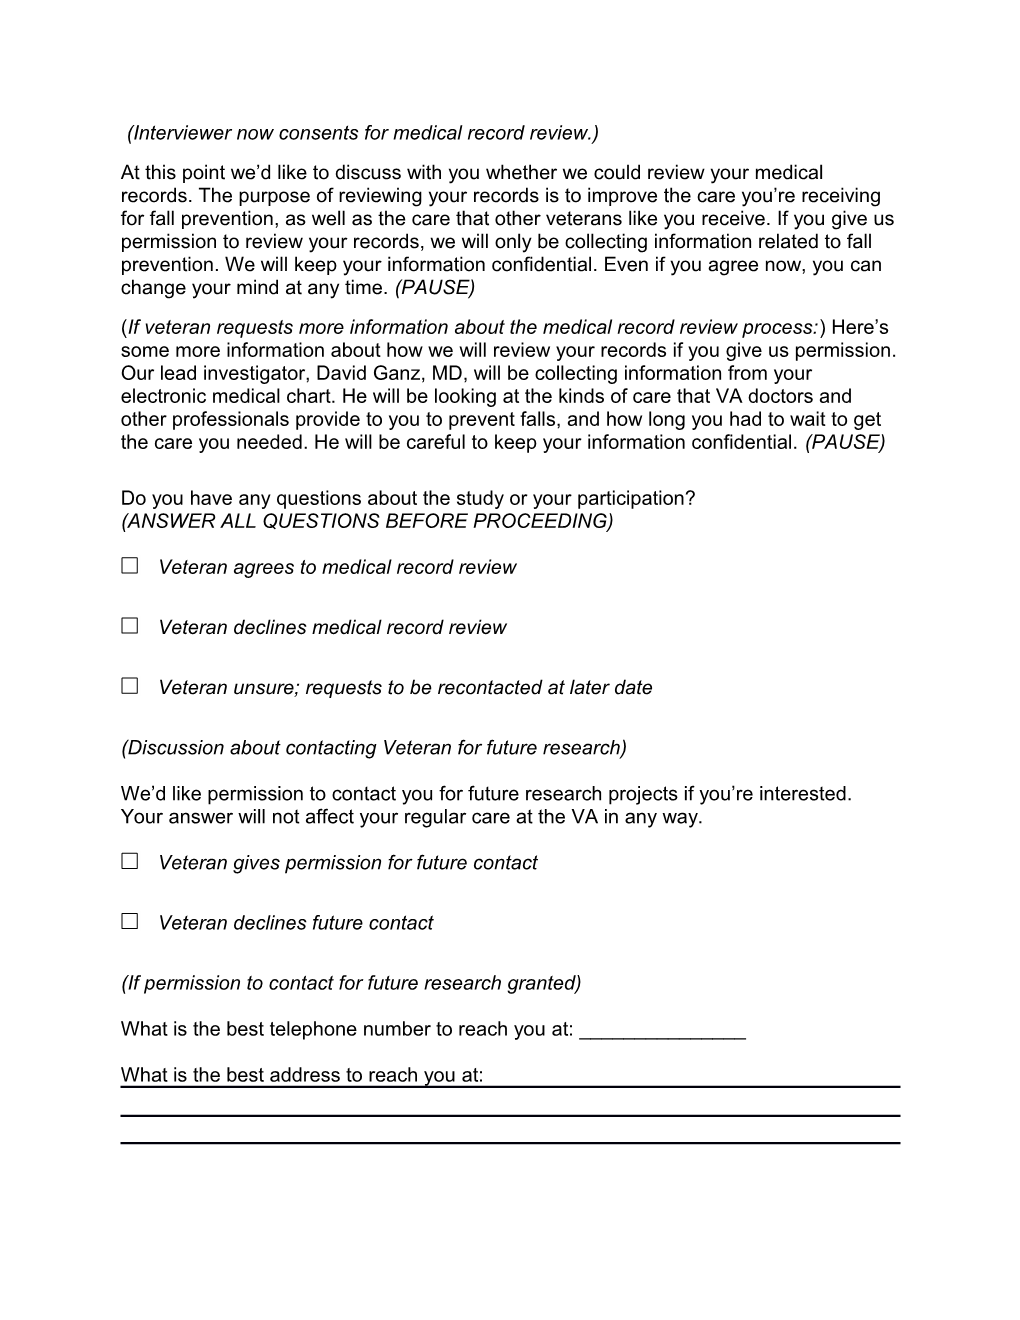 Additional File 3. Patient Interview Script and Response Form